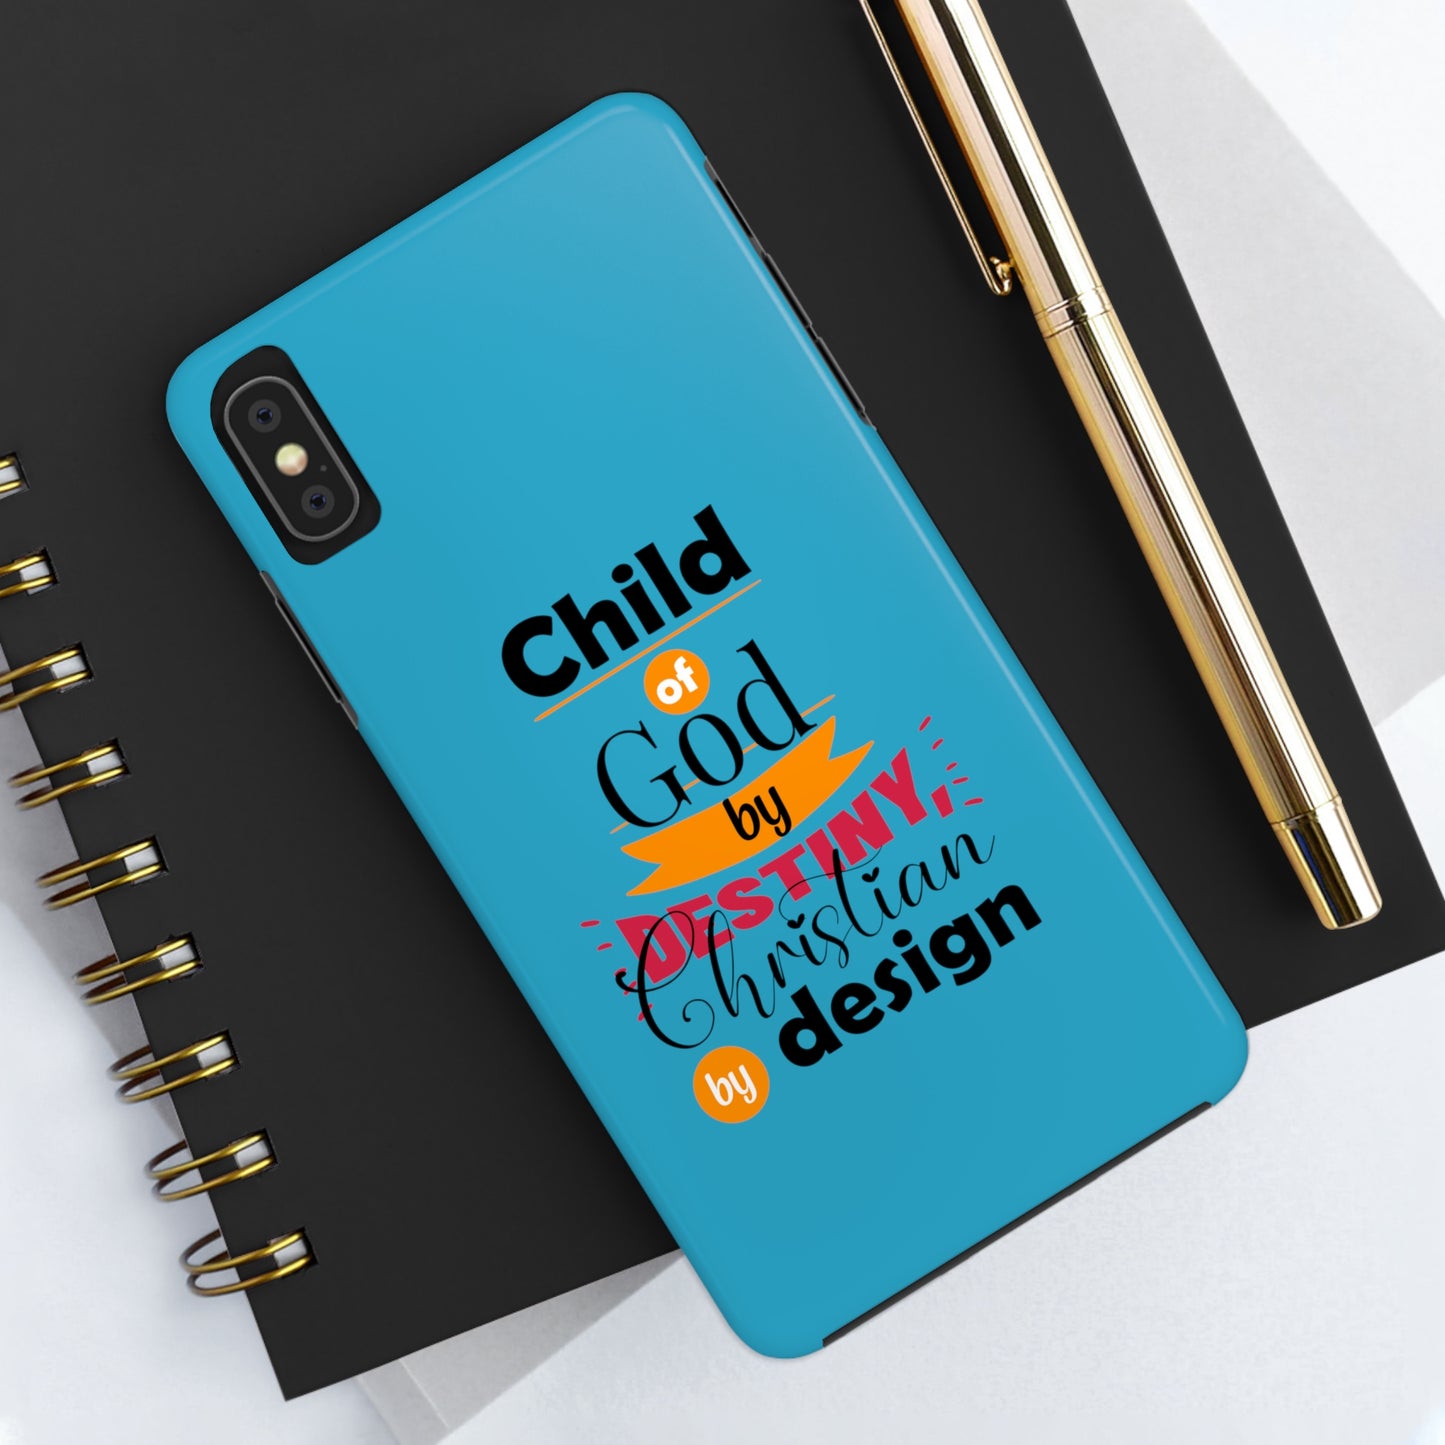 Child Of God By Destiny Christian By Design Tough Phone Cases, Case-Mate